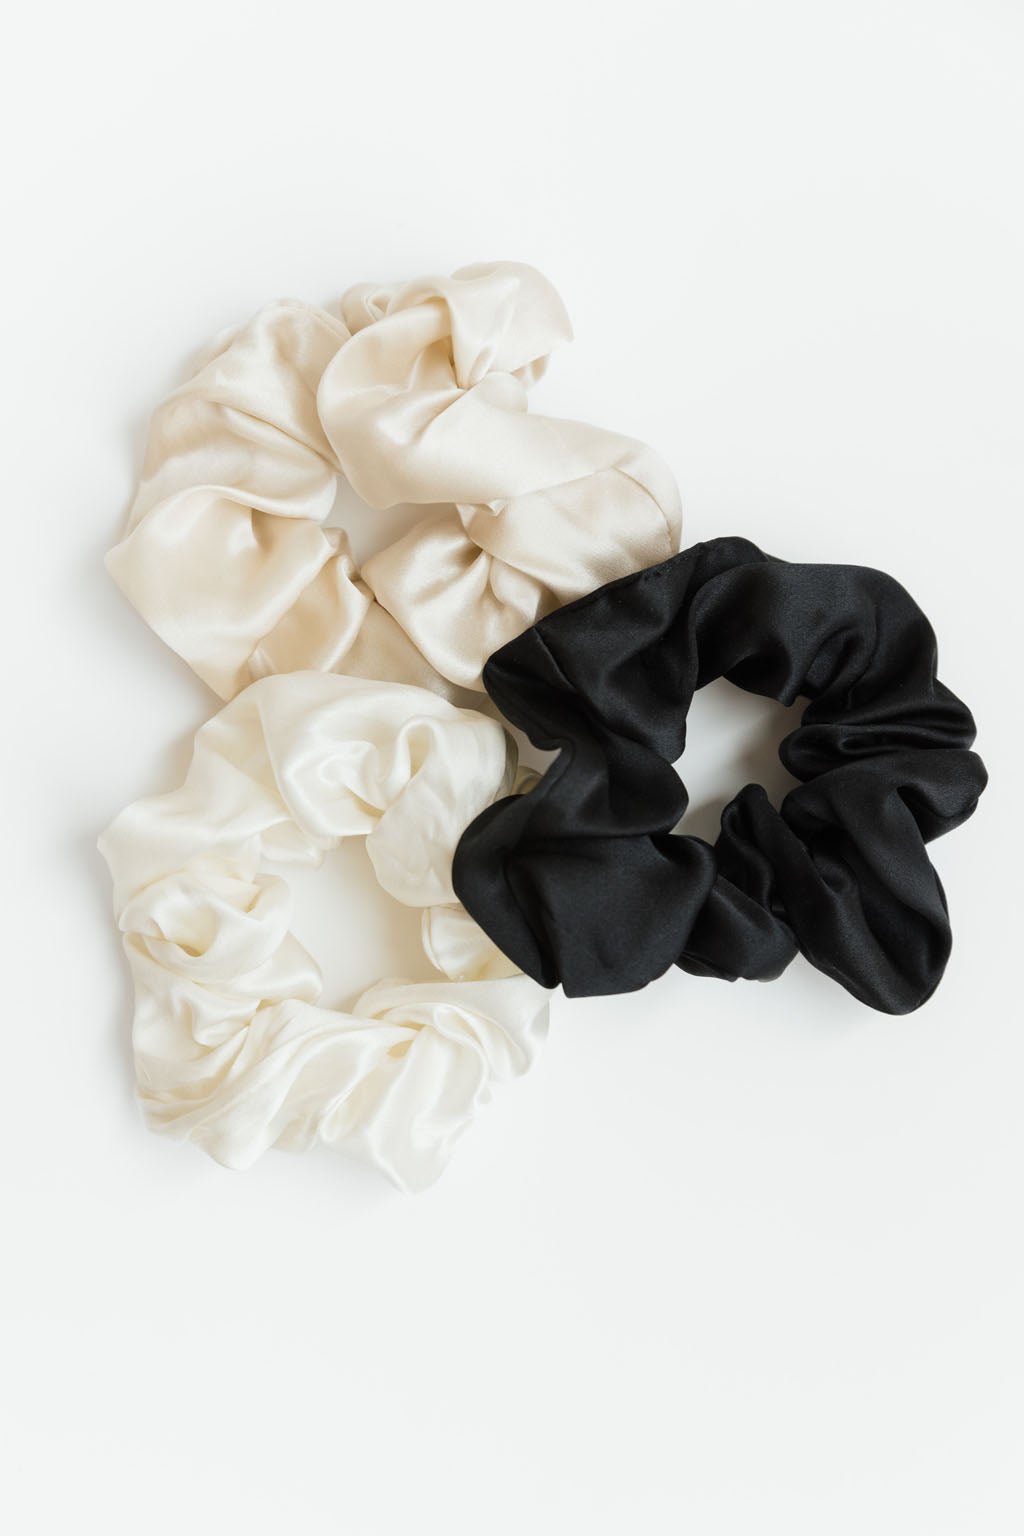 Three Silk Scrunchies from Cozy Earth are arranged in a triangle on a white background. Two scrunchies are cream-colored, and one is black. The soft, shiny fabric gives them a luxurious appearance.